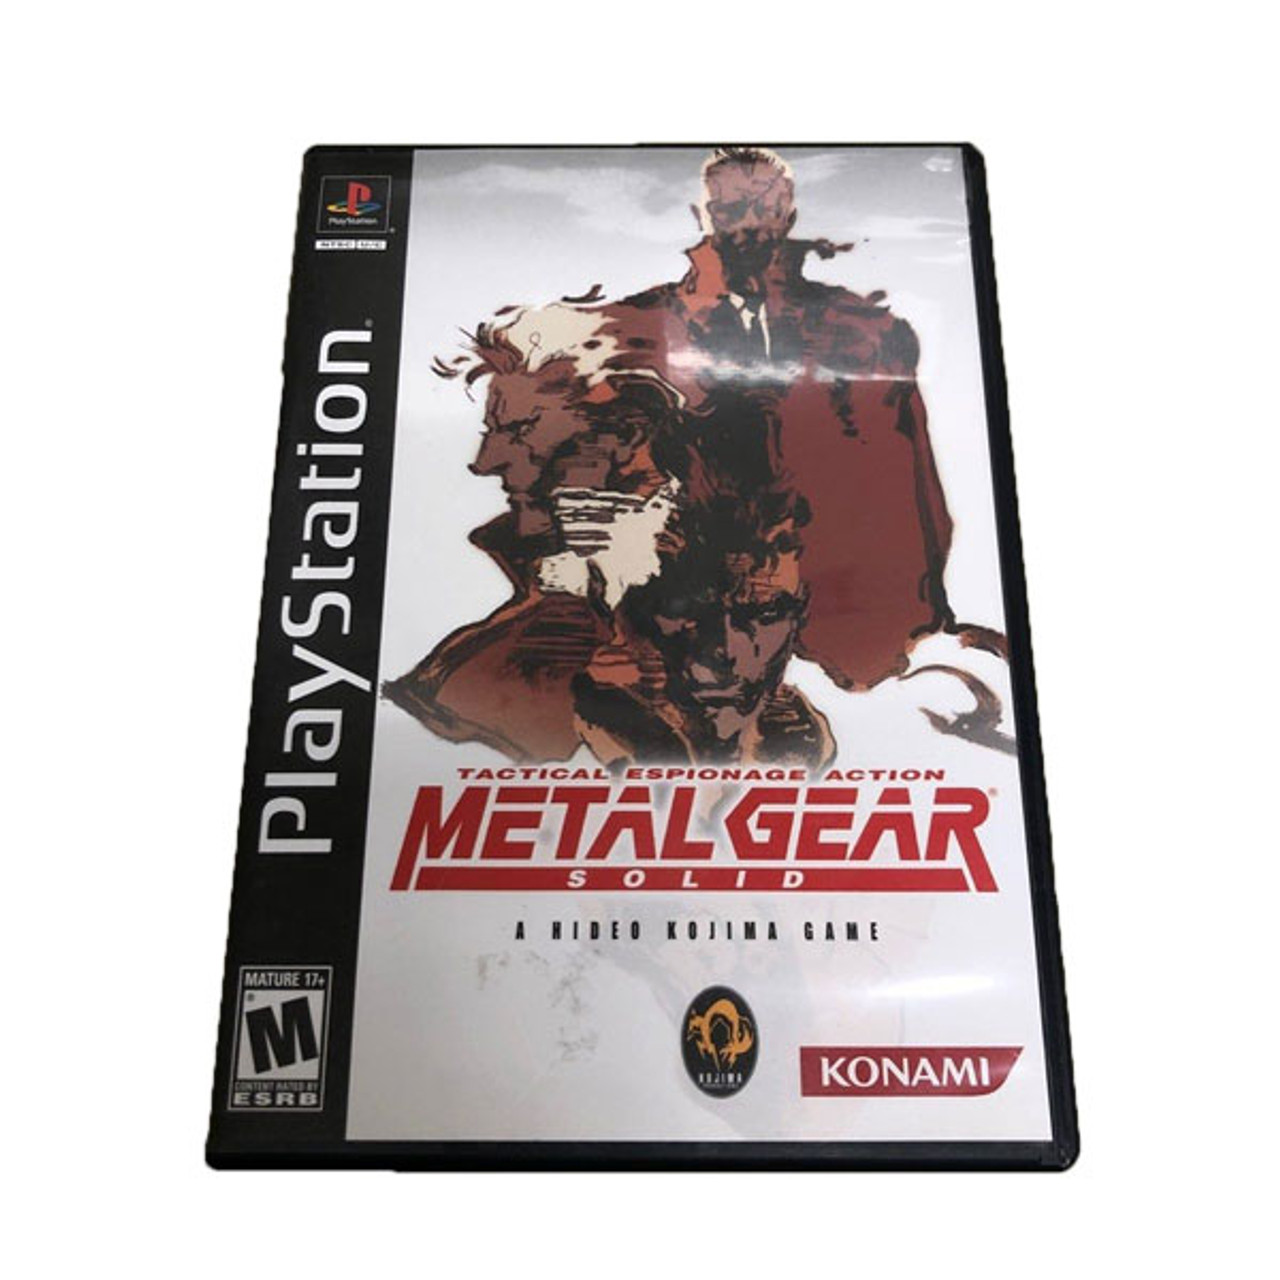 Metal Gear Solid PlayStation 2 PS2 Game For Sale